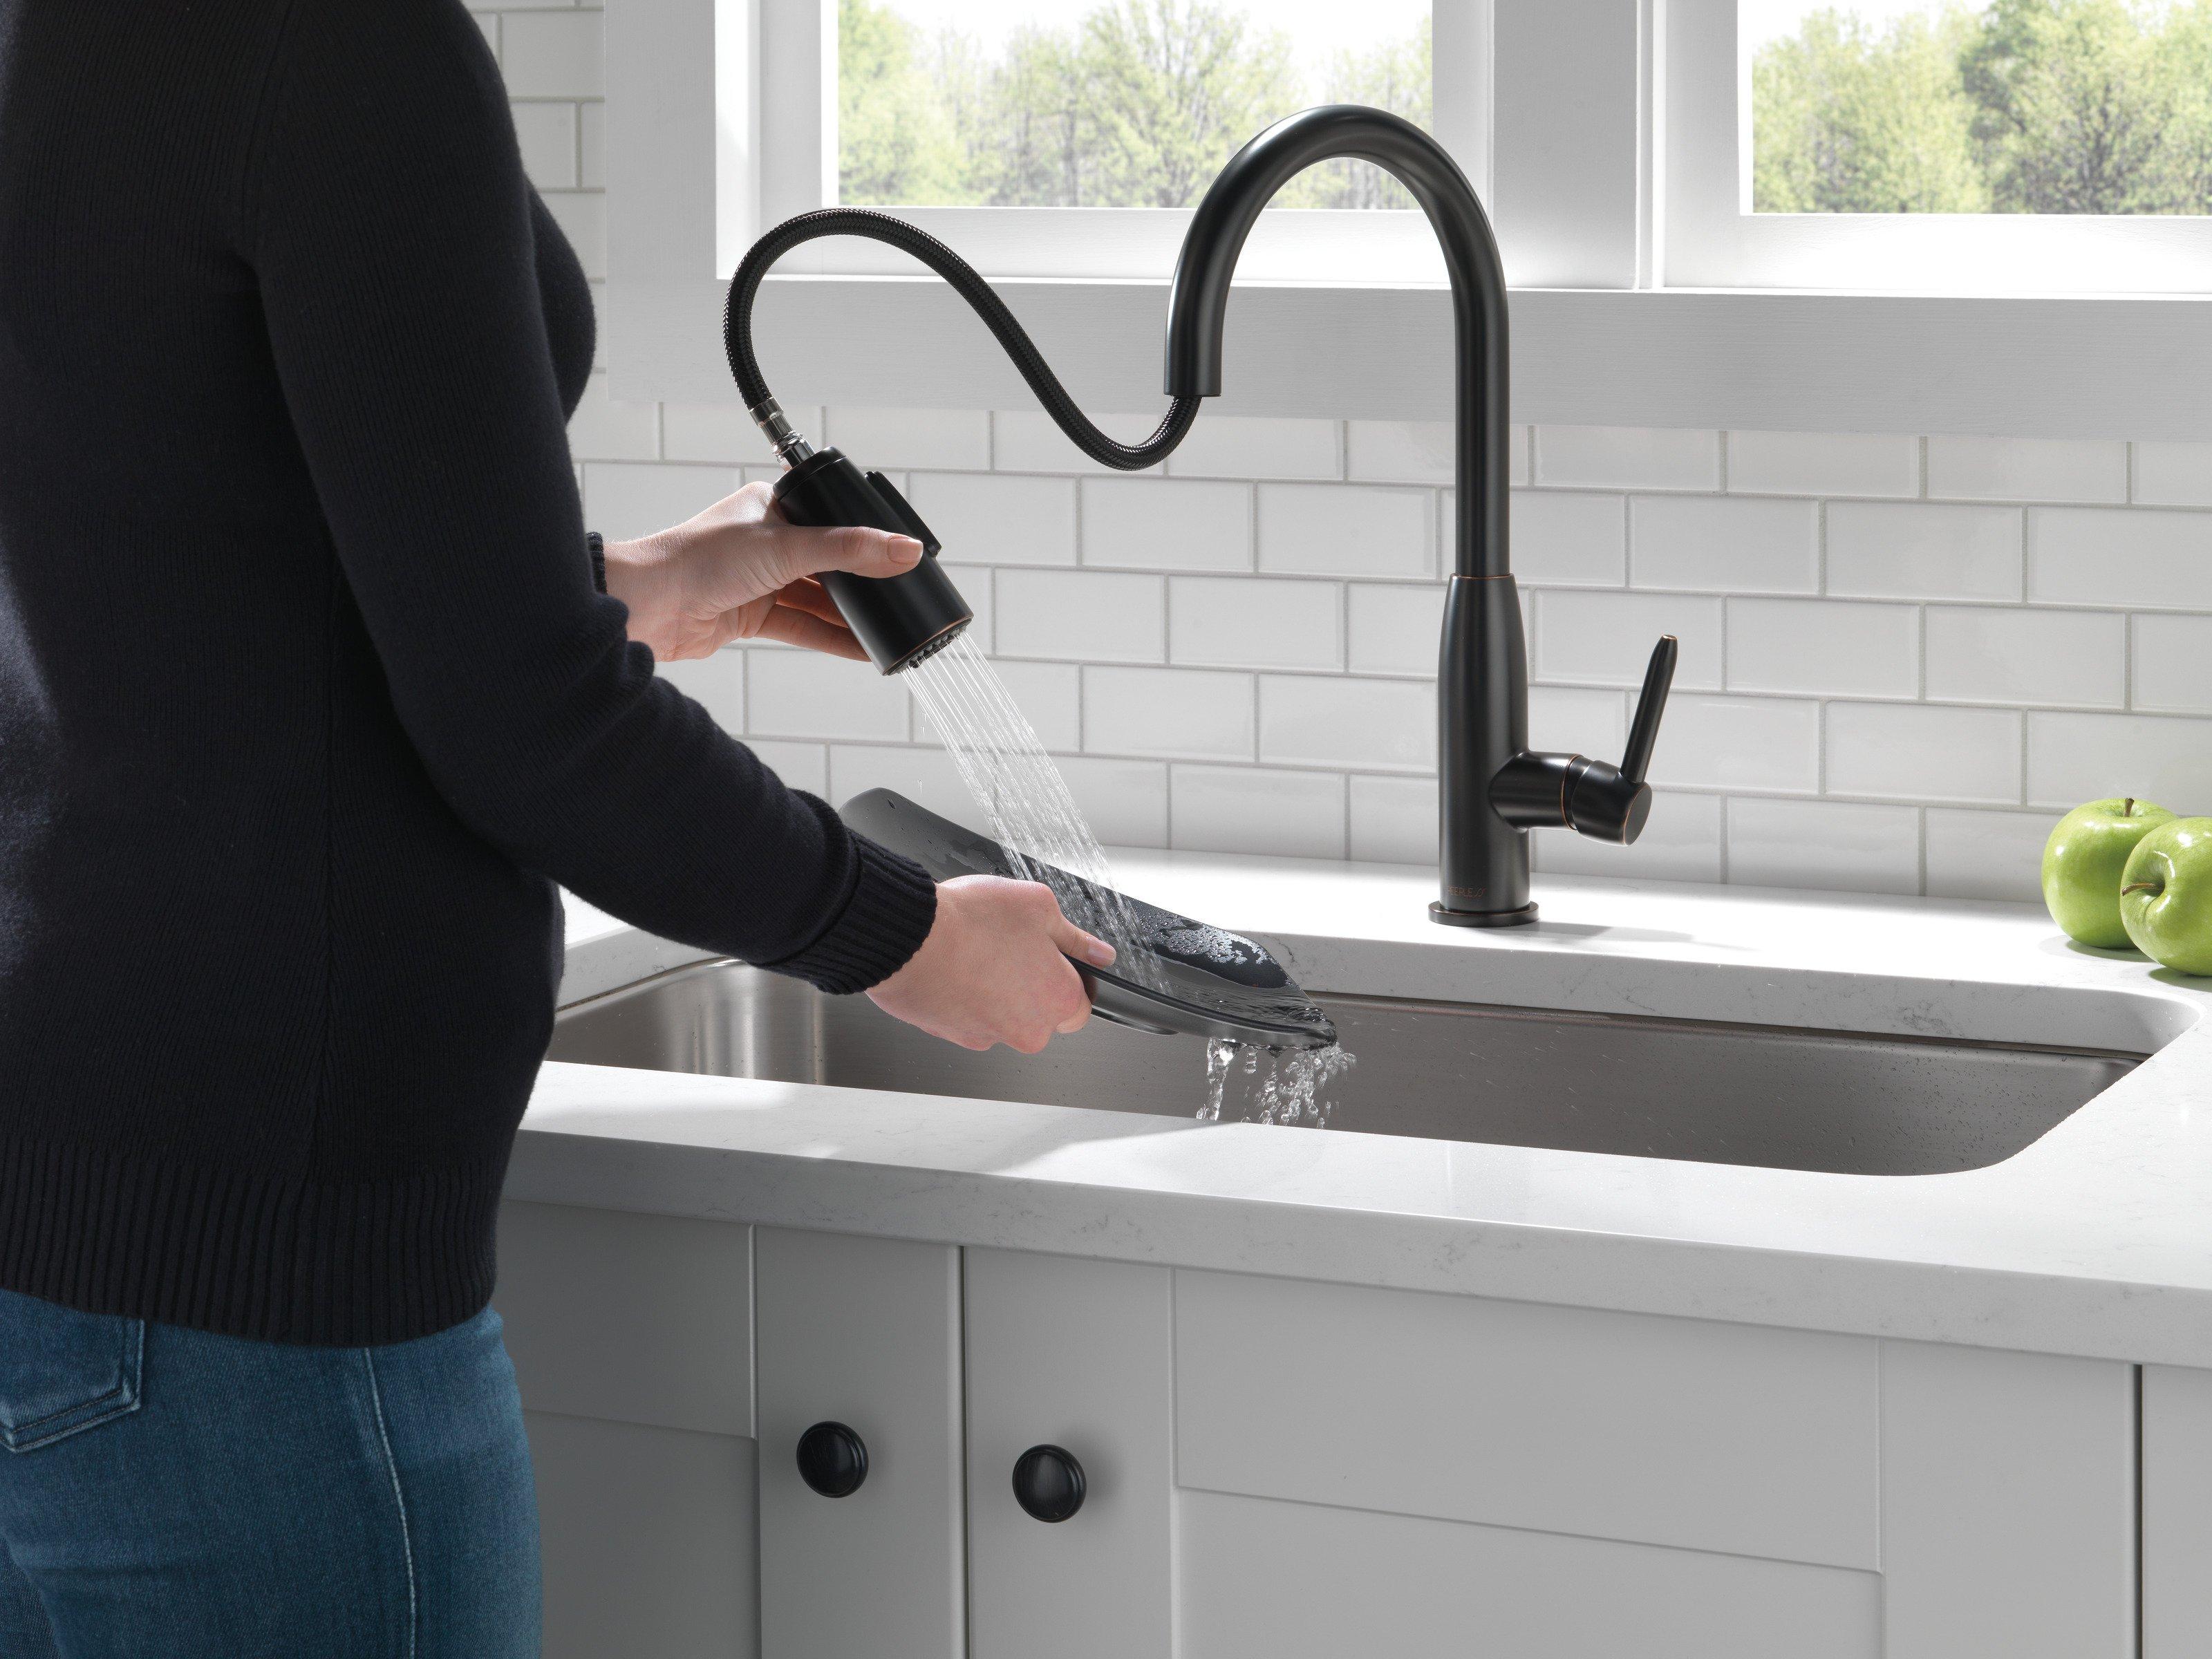 A woman uses a black pull-down kitchen faucet to rinse a plate in her home.